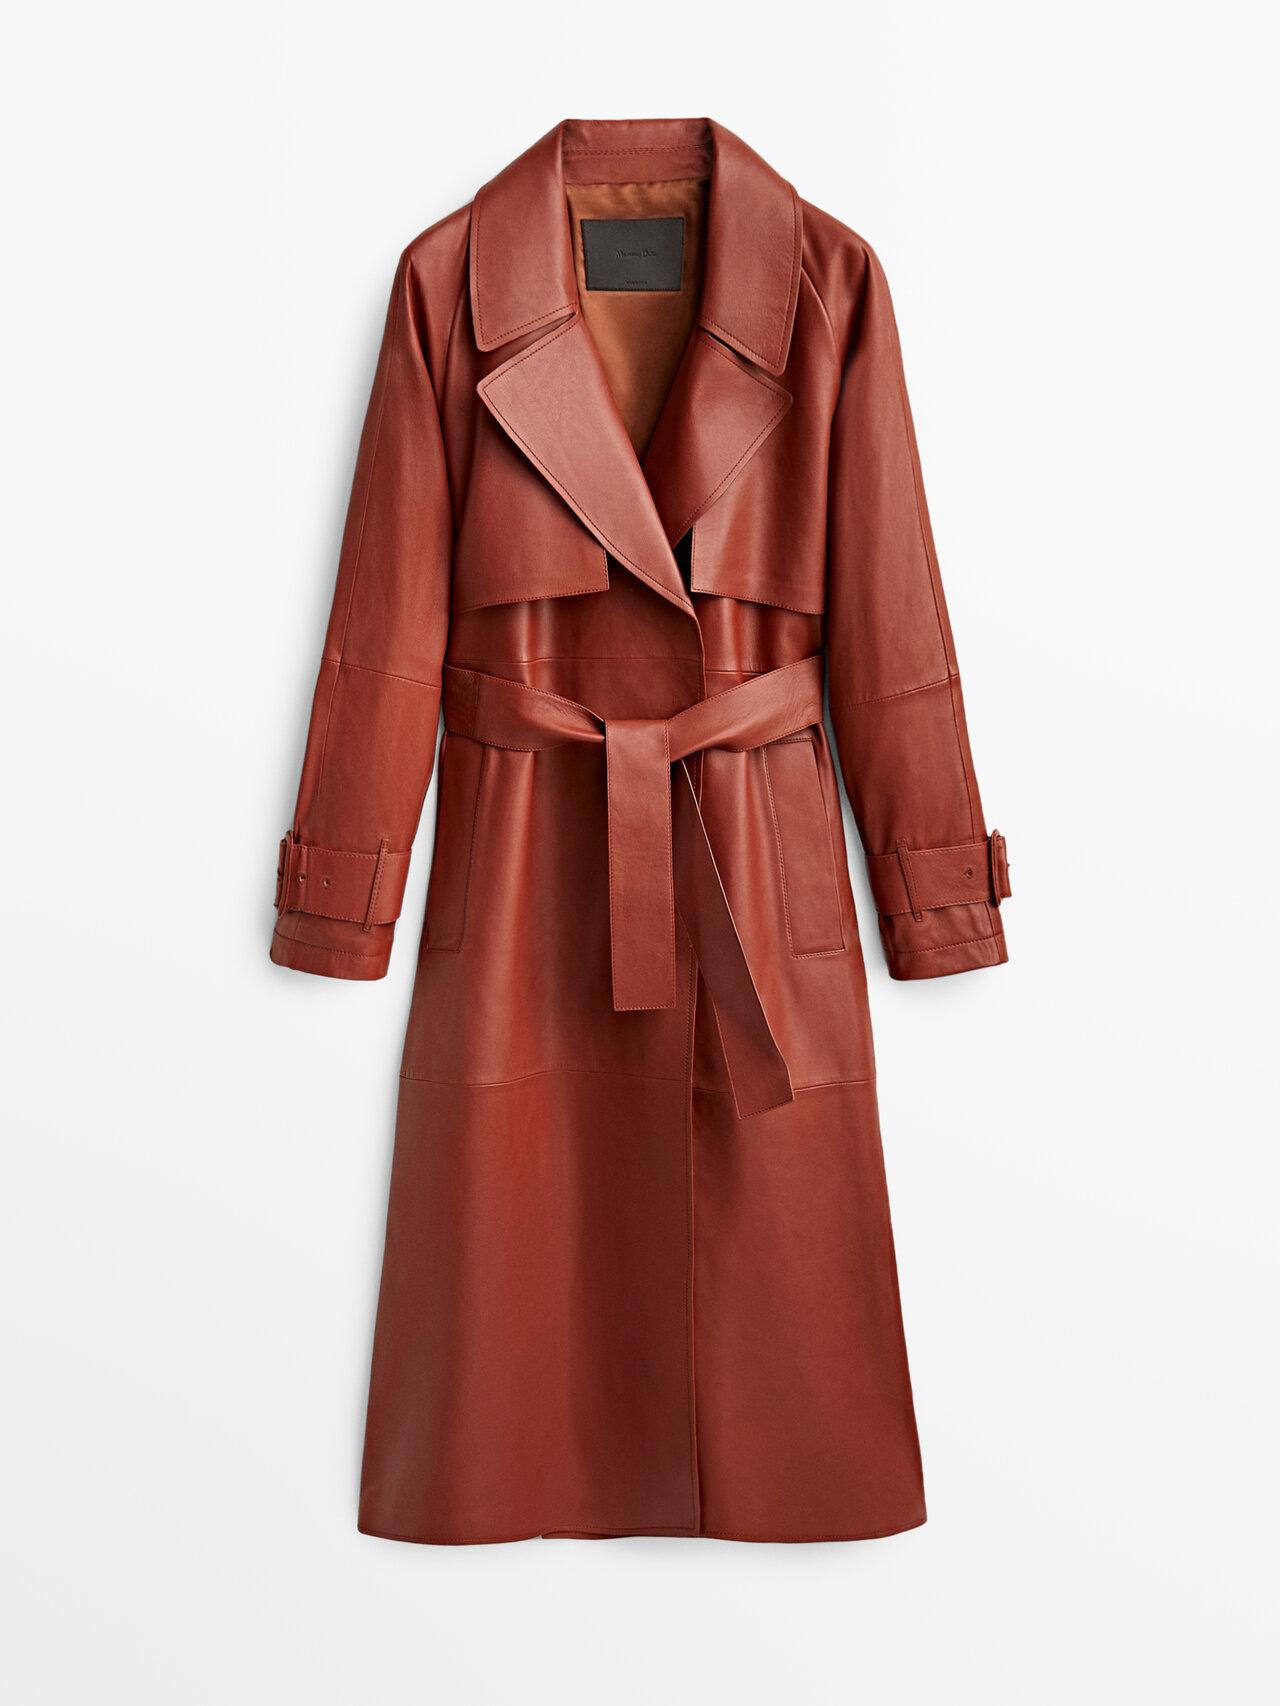 MASSIMO DUTTI Nappa Leather Trench Coat With Belt in Red | Lyst